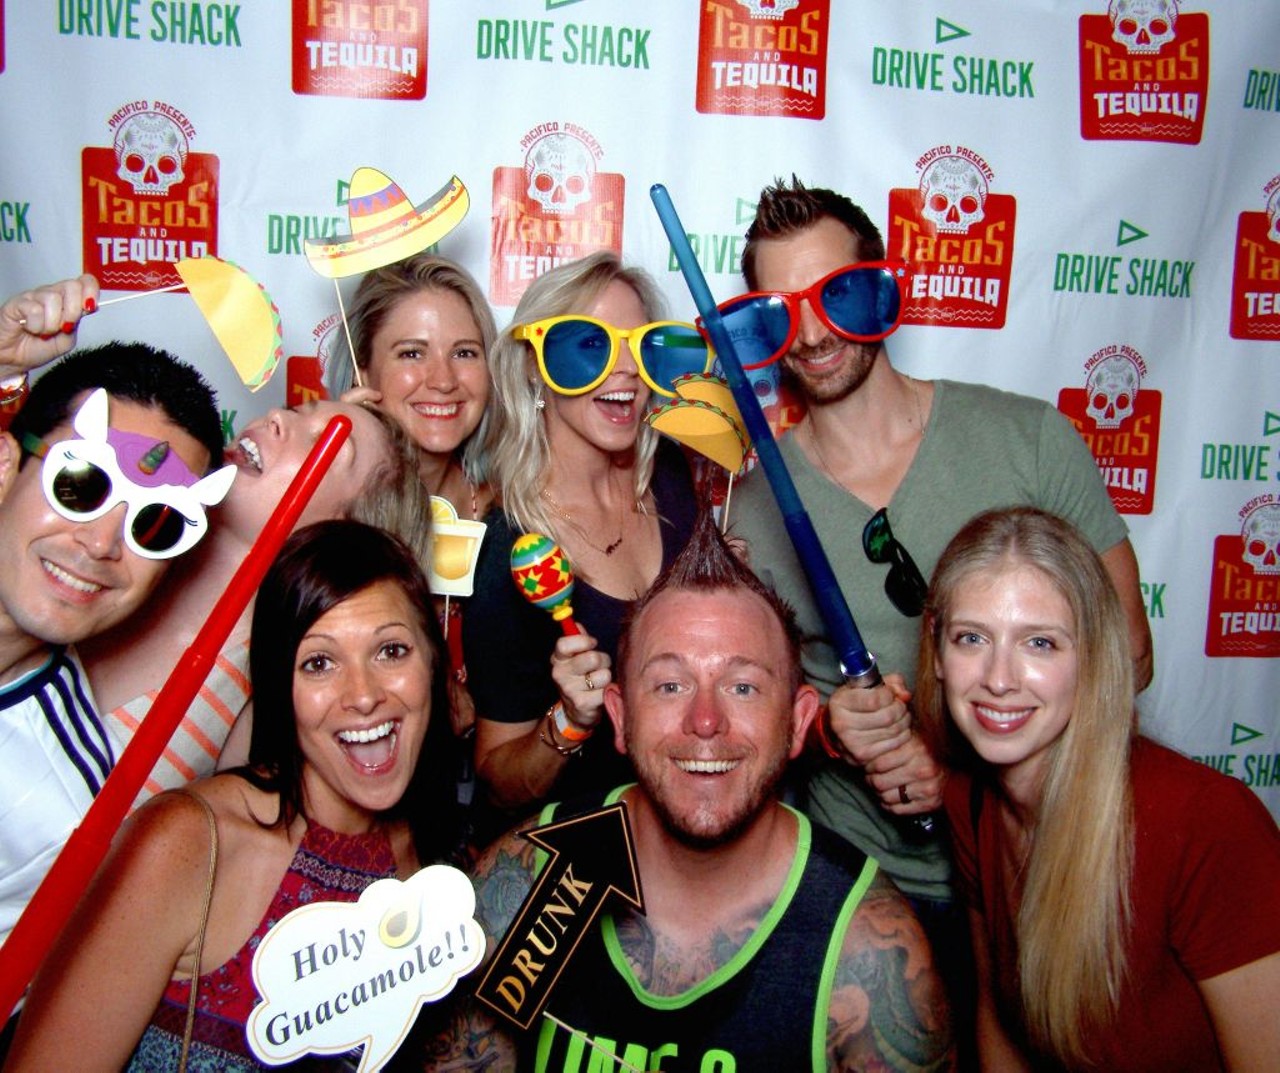 PROMO: Photos from the Drive Shack photo booth at Tacos & Tequila 2019